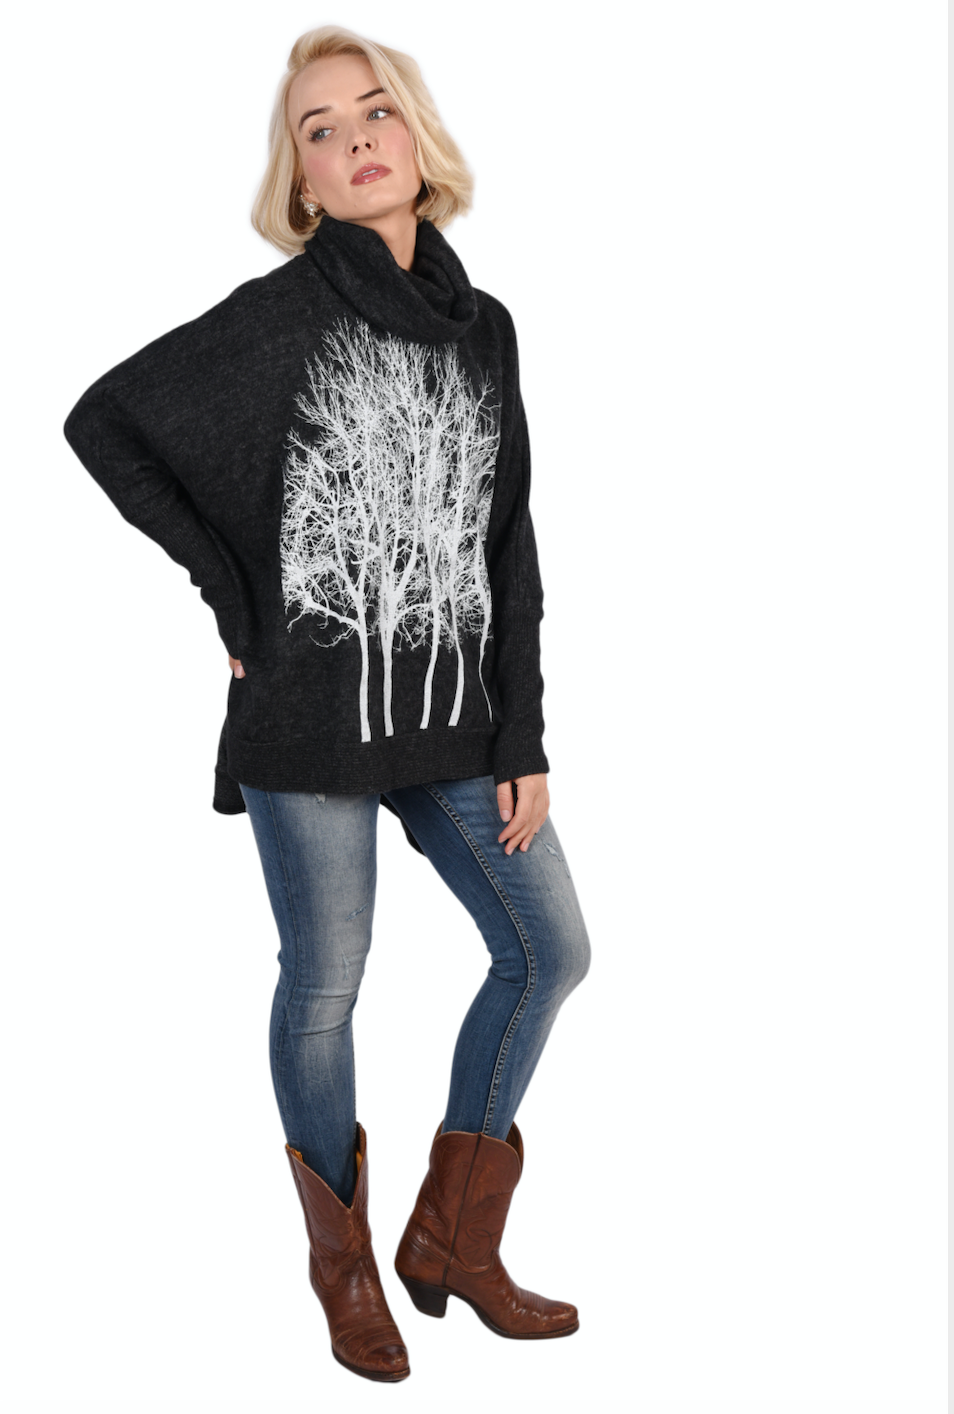 Fairytale Trees Poncho with Sleeves Charcoal